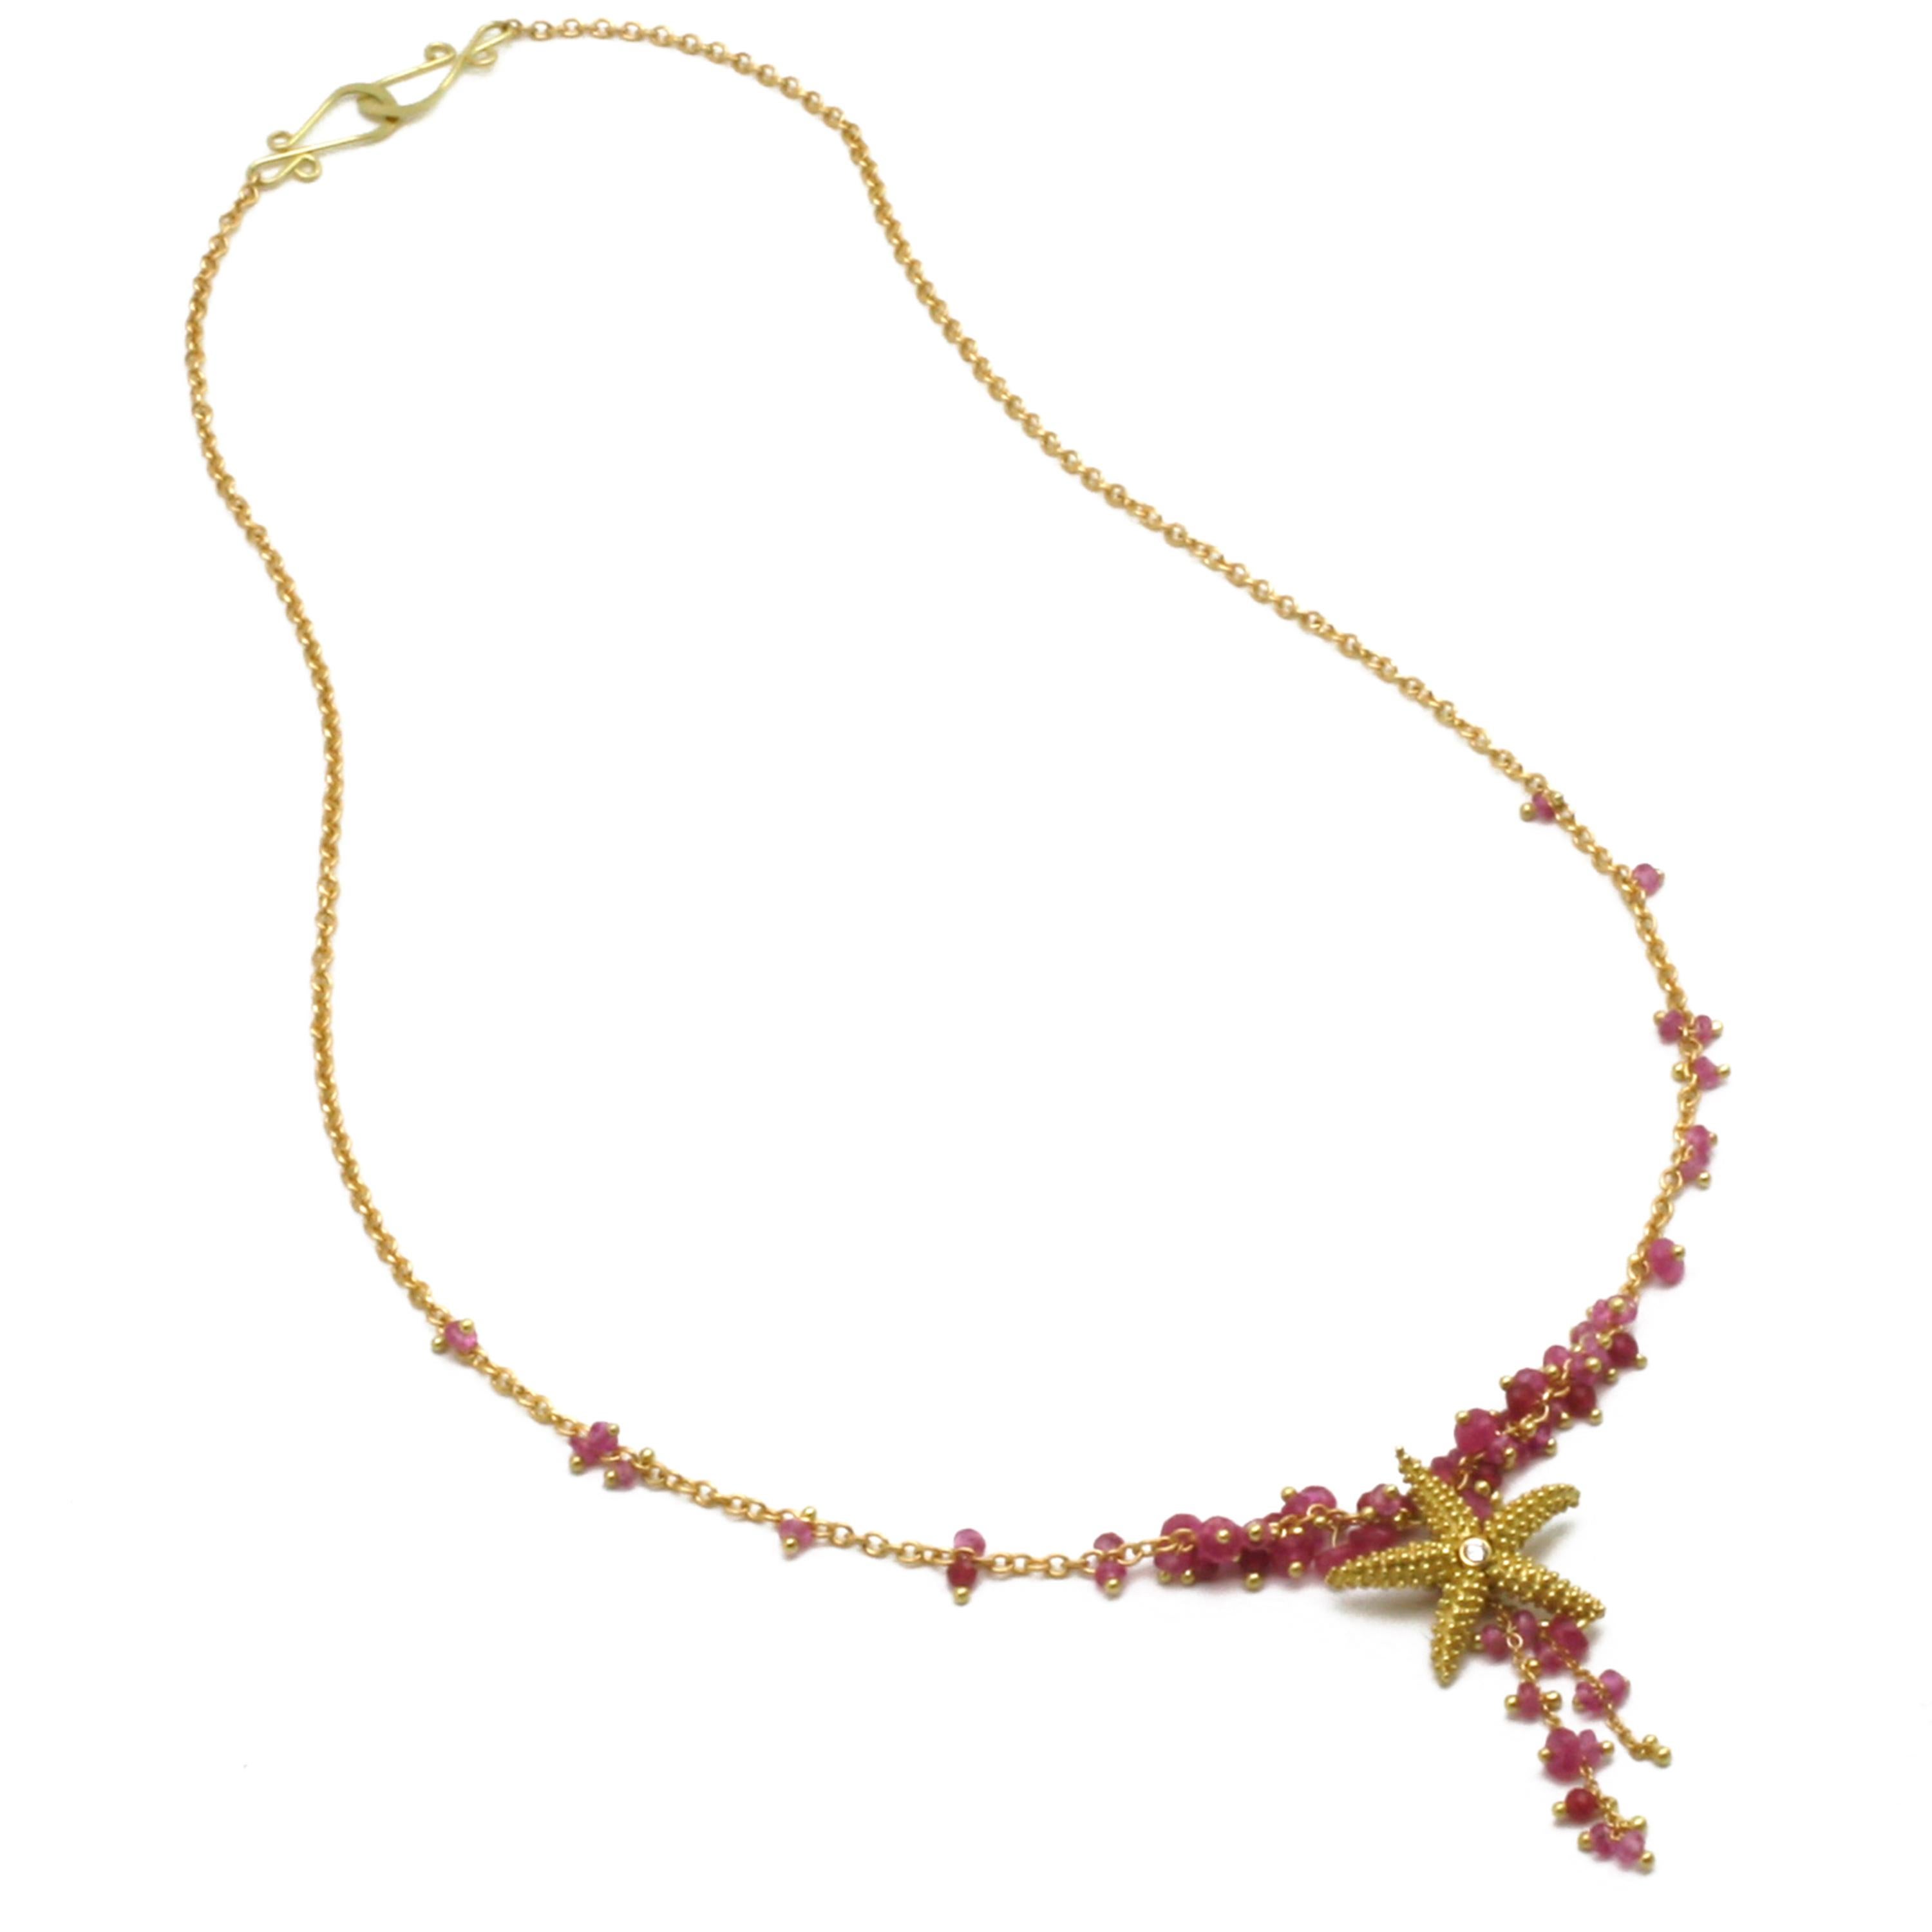 Women's Diana Kim England Seastar Necklace with Pink Sapphire Faceted Beads in 18k Gold For Sale